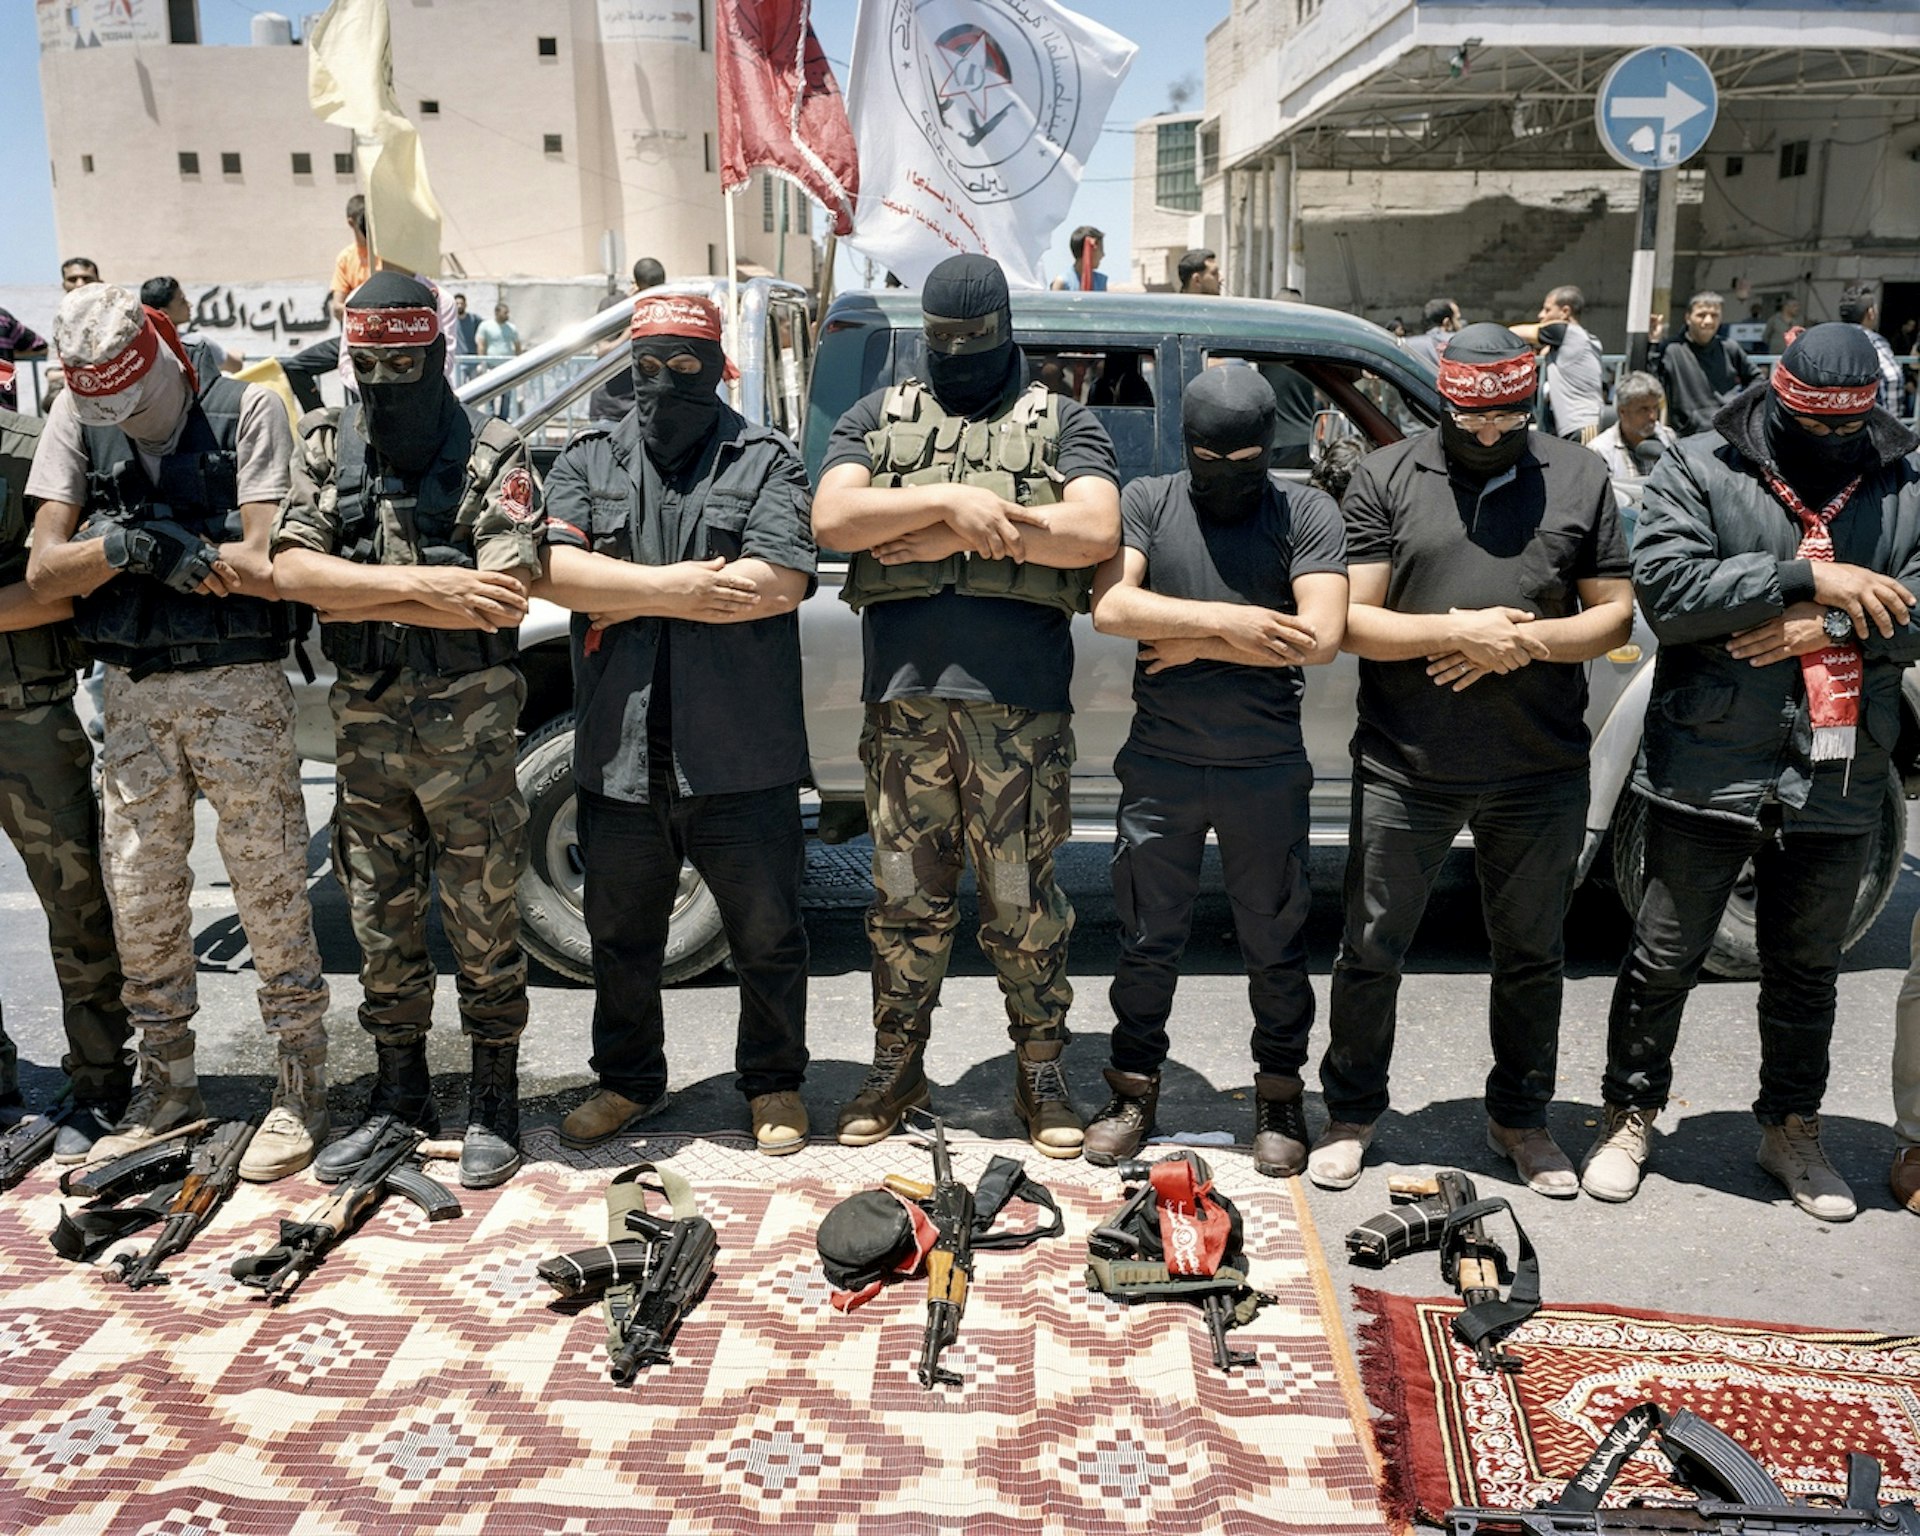 May 16, 2017. Gaza City, Gaza Strip. Palestinian fighters pray on the occasion of the funeral for the martyr Muhammad Majid Bakr. The young fisherman had been shot the previous day, on the Day of Nakba, by the Israel Defence Forces. The Day of Nakba (‘Catastrophe’) commemorates the expulsion of the Palestinians in 1948. According to information from the army, the fishing boat was outside of the fishing zone allowed by Israel. The fishermen did not react to shots fired into the air, shots were subsequently fired at the boat.